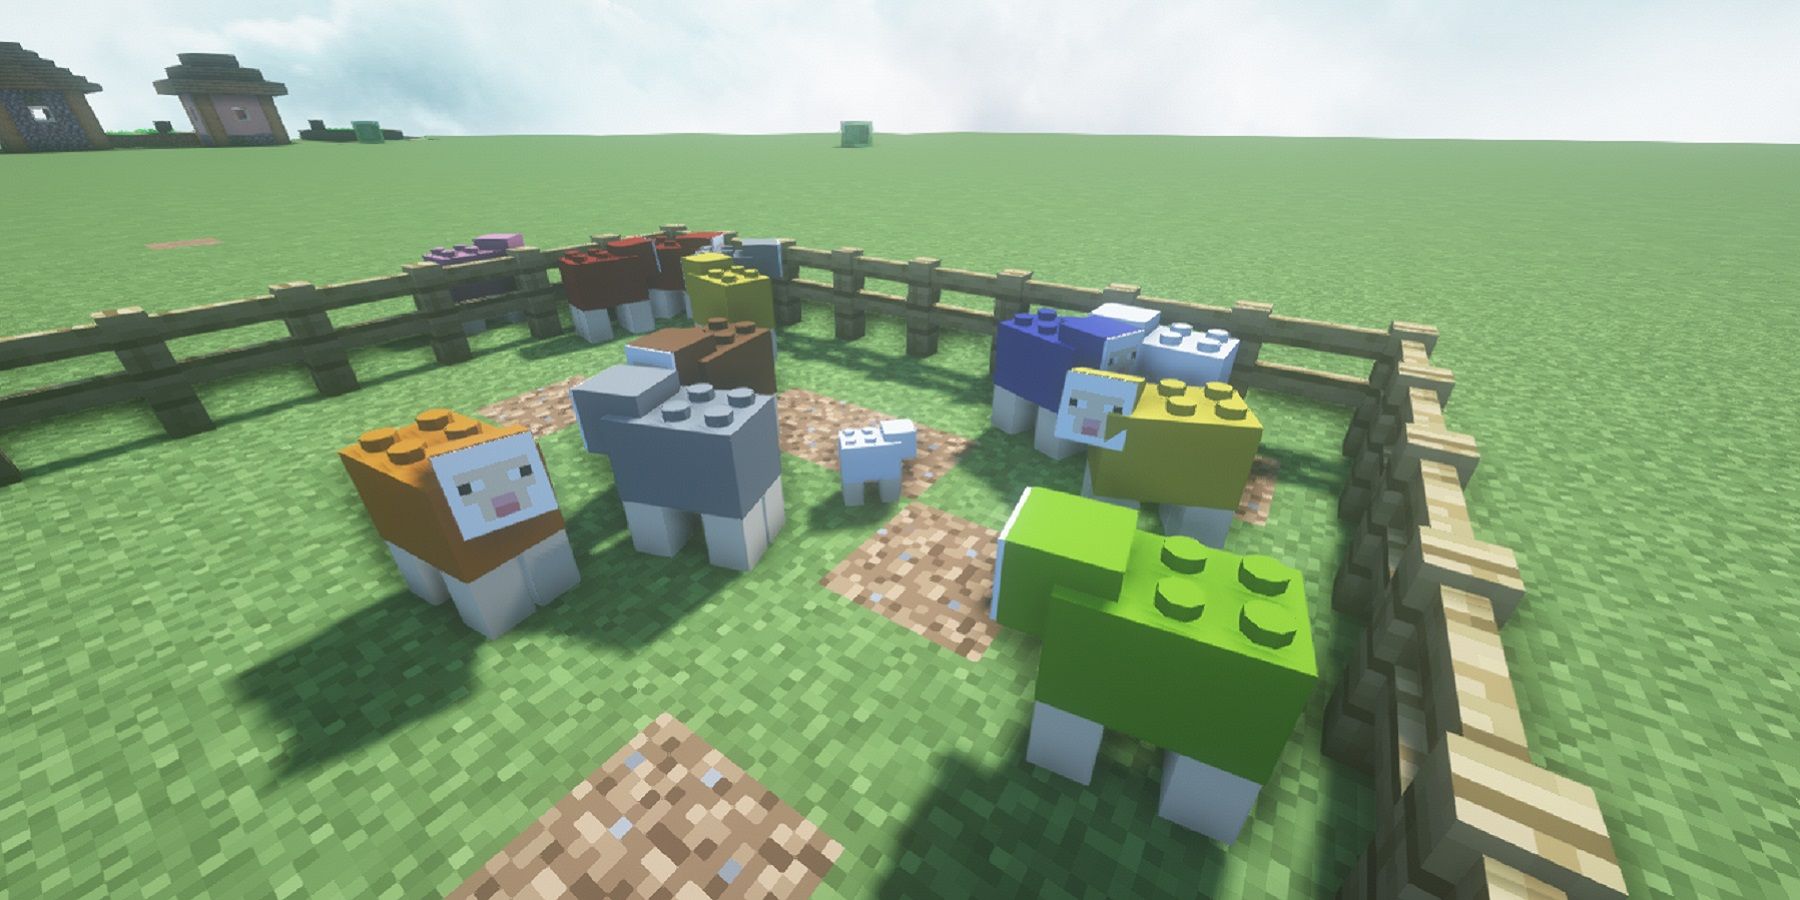 Image from Minecraft showing the sheep as LEGO figures.